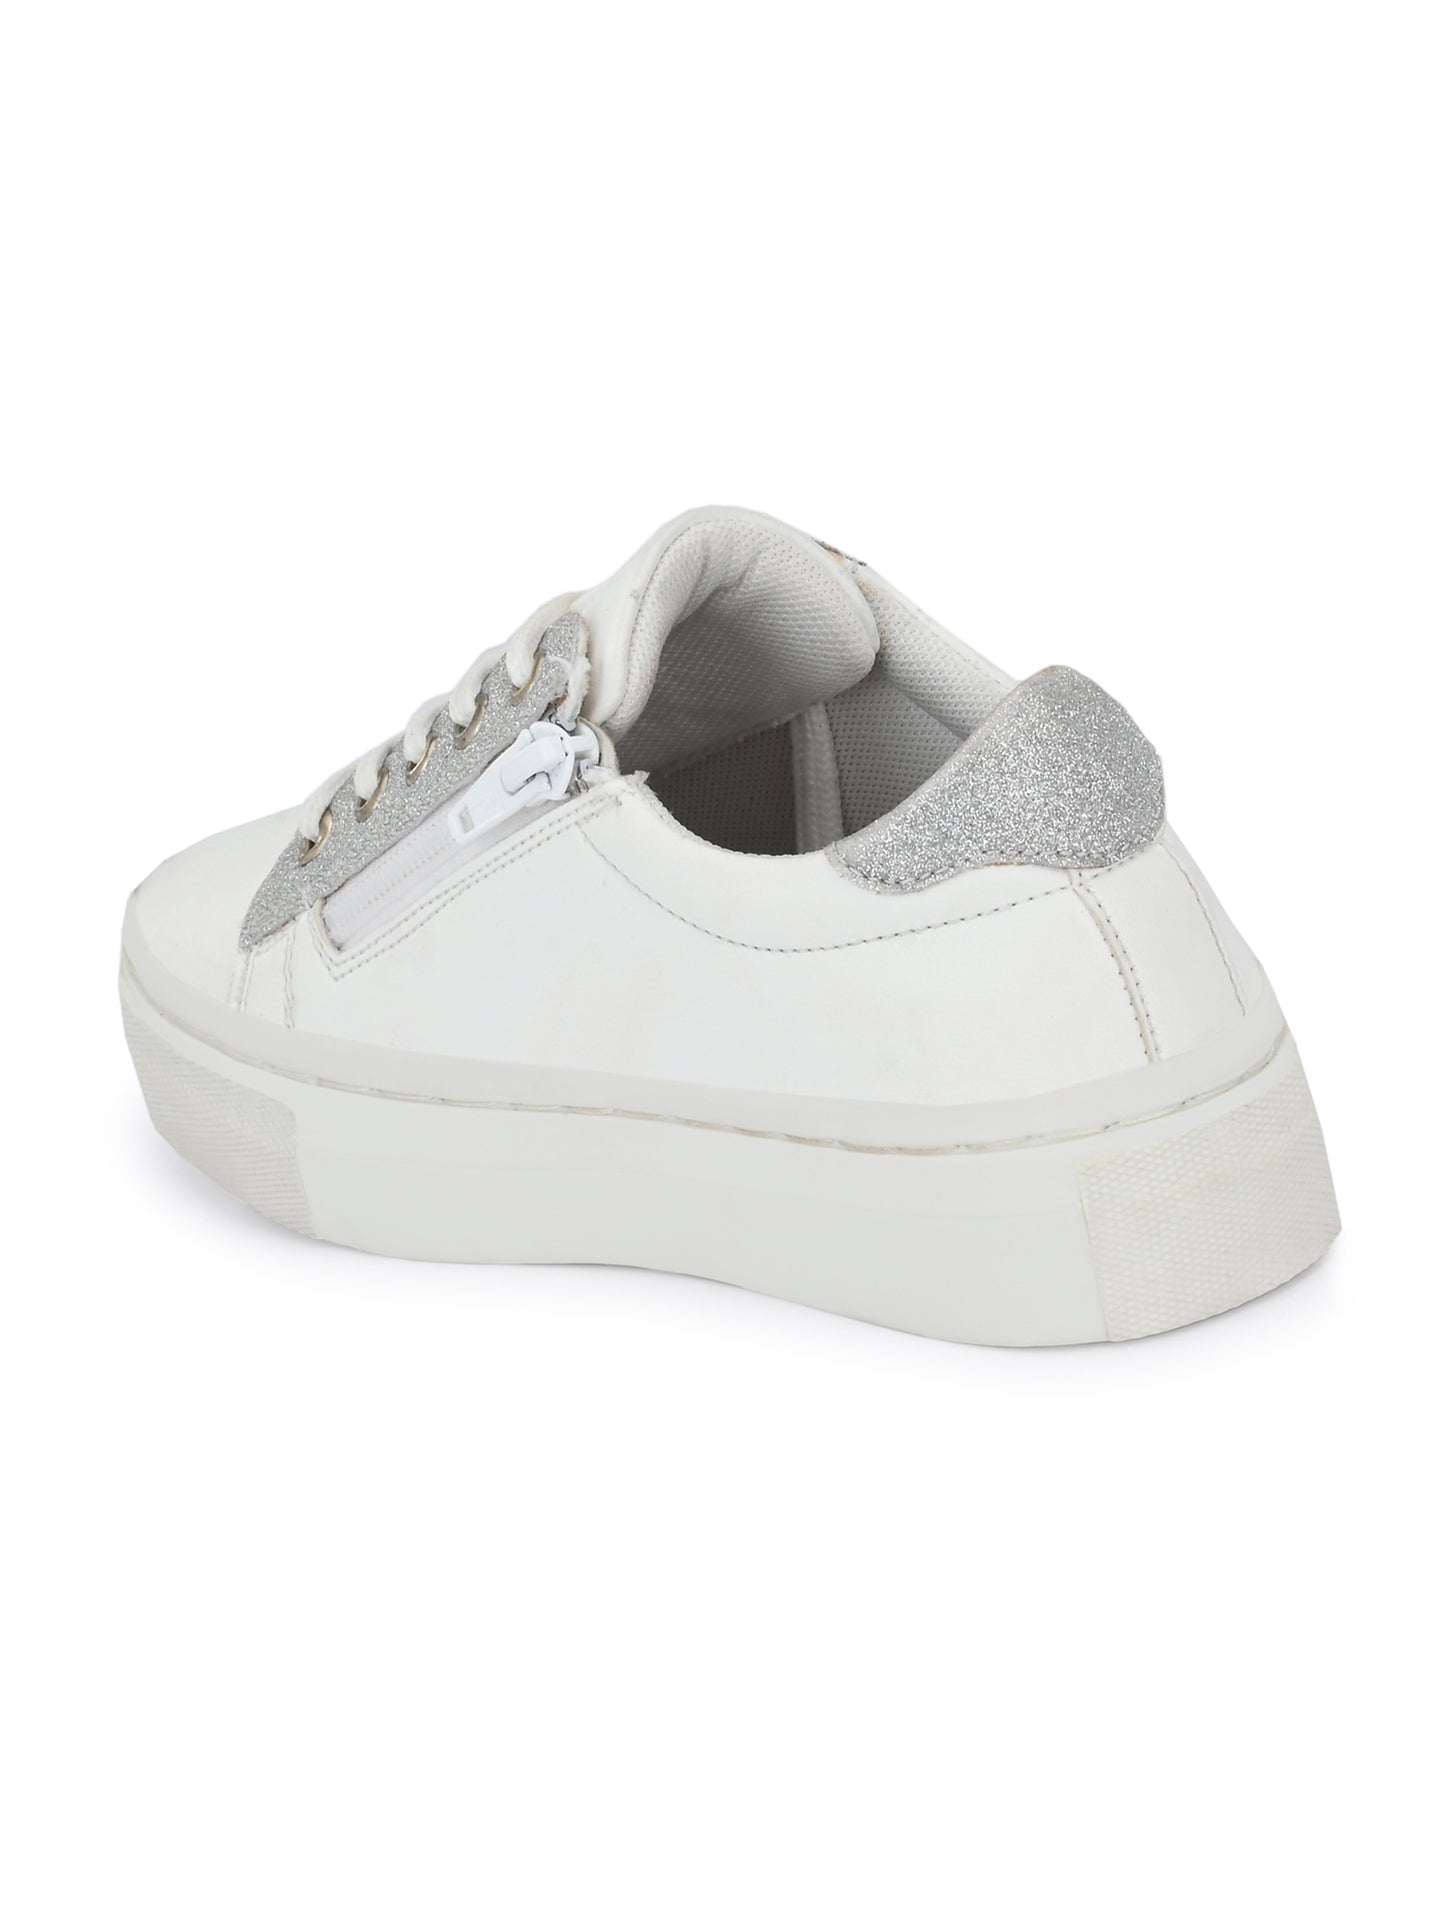 Nice White Shoes for Kids